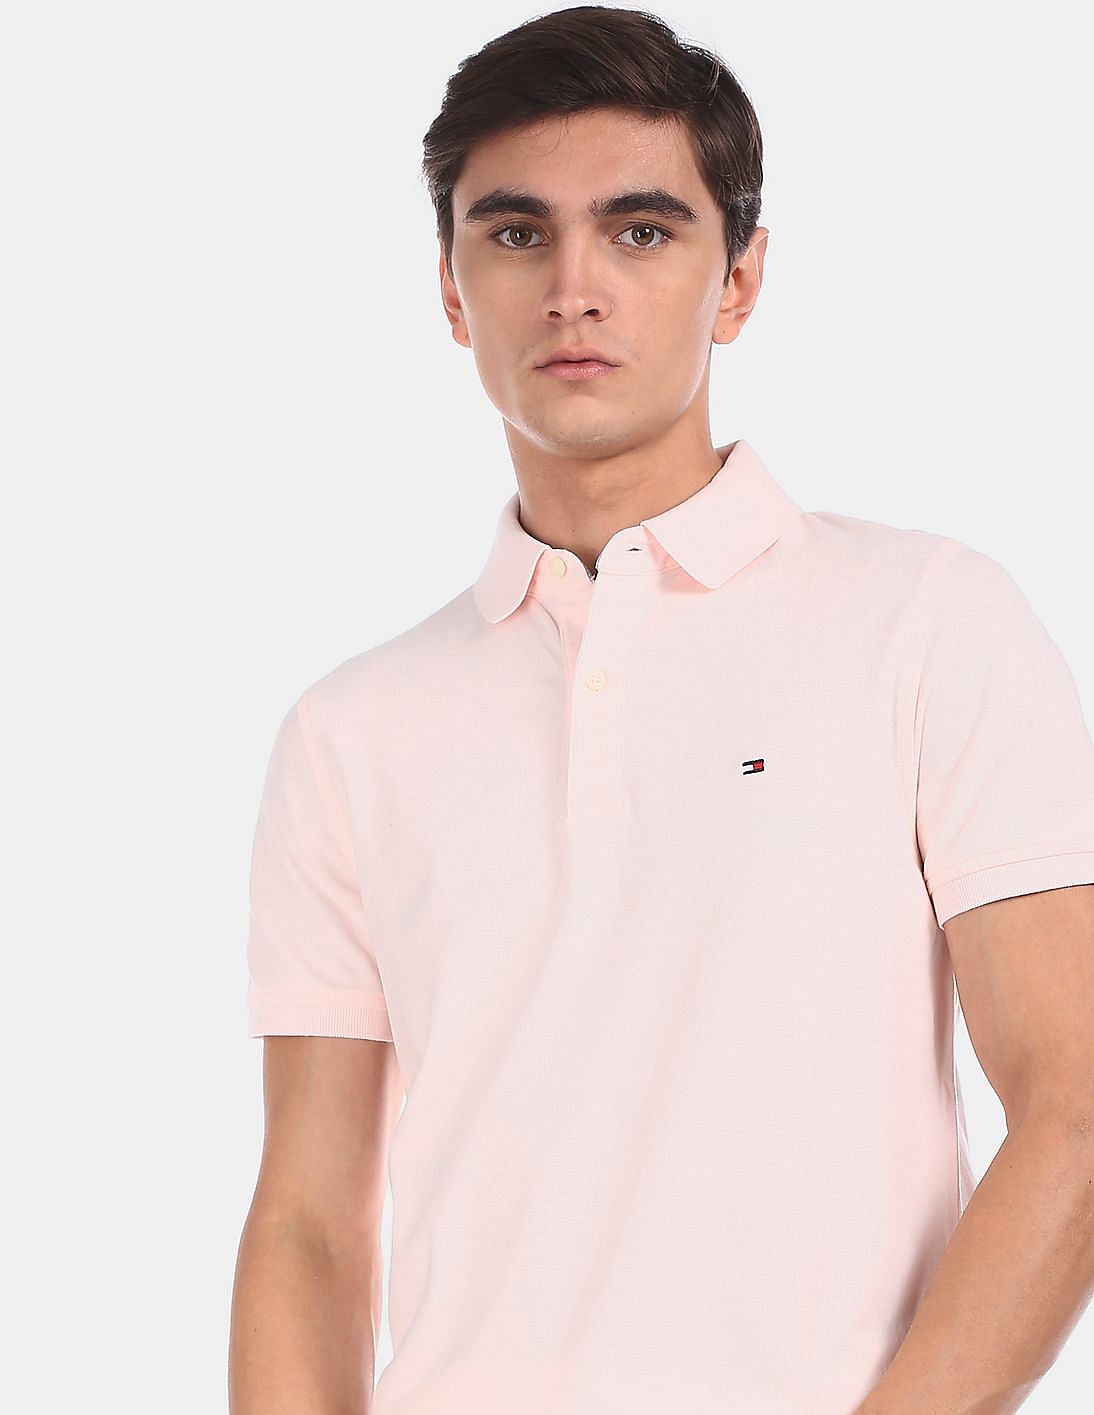 Buy Tommy Hilfiger Men Pink Short Sleeve Solid Pique Polo Shirt - NNNOW.com